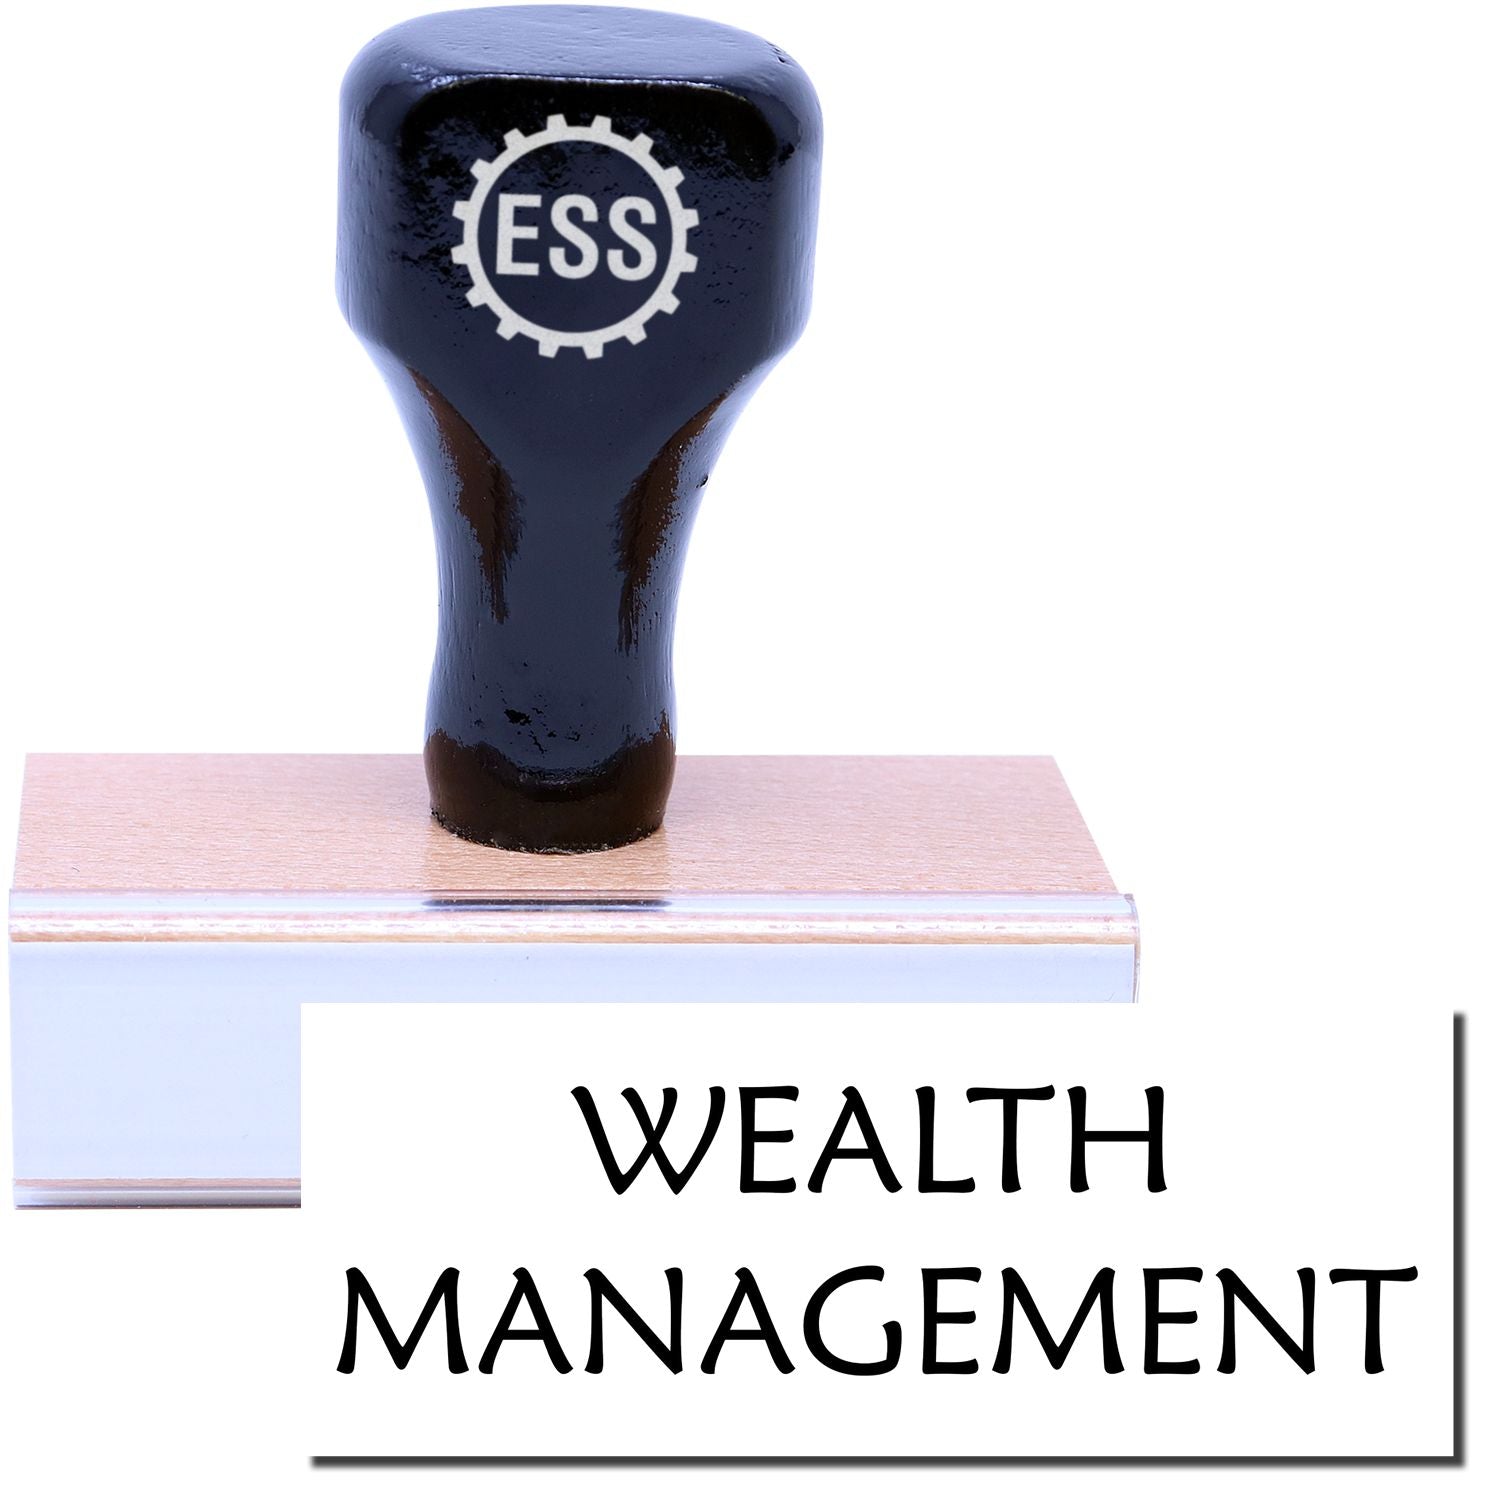 A stock office rubber stamp with a stamped image showing how the text "WEALTH MANAGEMENT" in a large font is displayed after stamping.